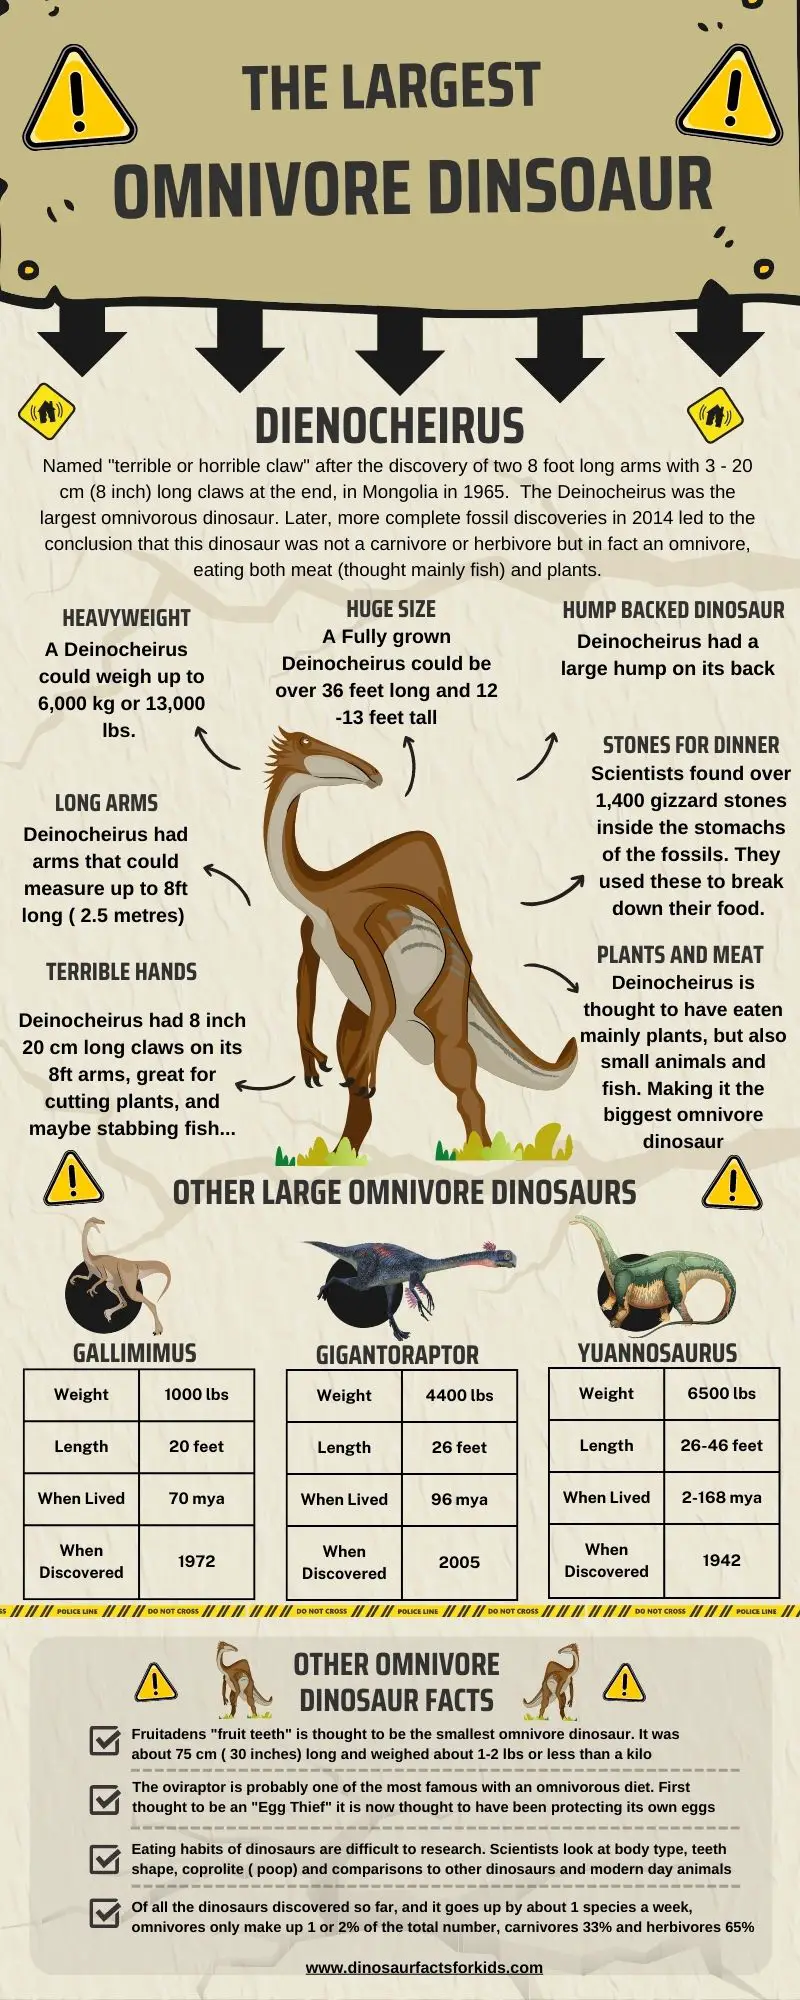 What Was The Biggest Omnivore Dinosaur? - Dinosaur Facts For Kids